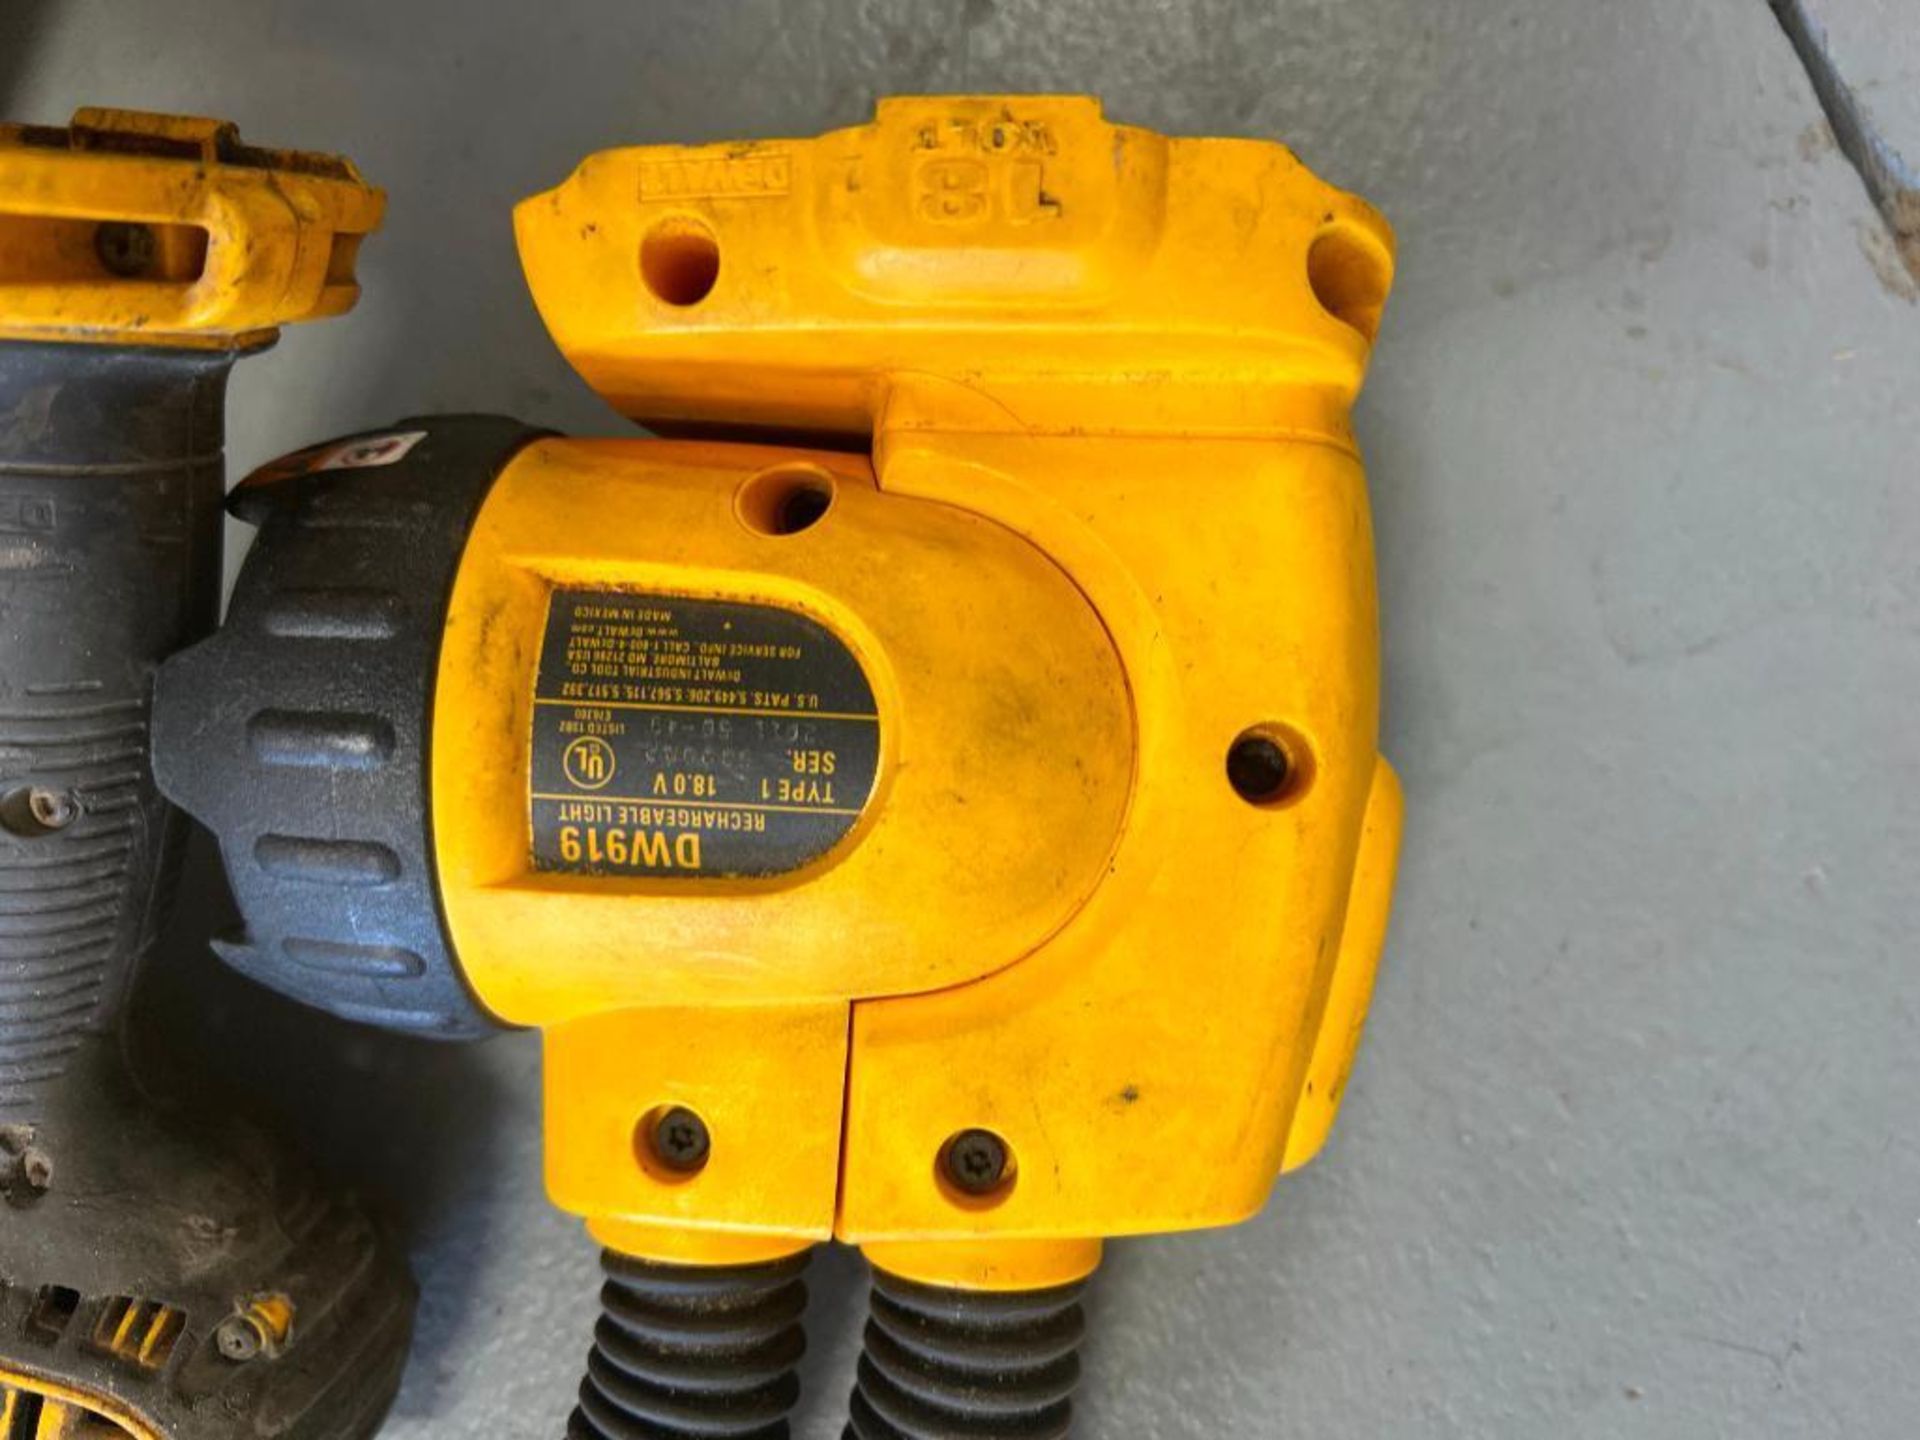 DeWalt DW919 Rechargeable Light, Impact Wrench, Batteries & Chargers. Located in Mt. Pleasant, IA - Image 4 of 4